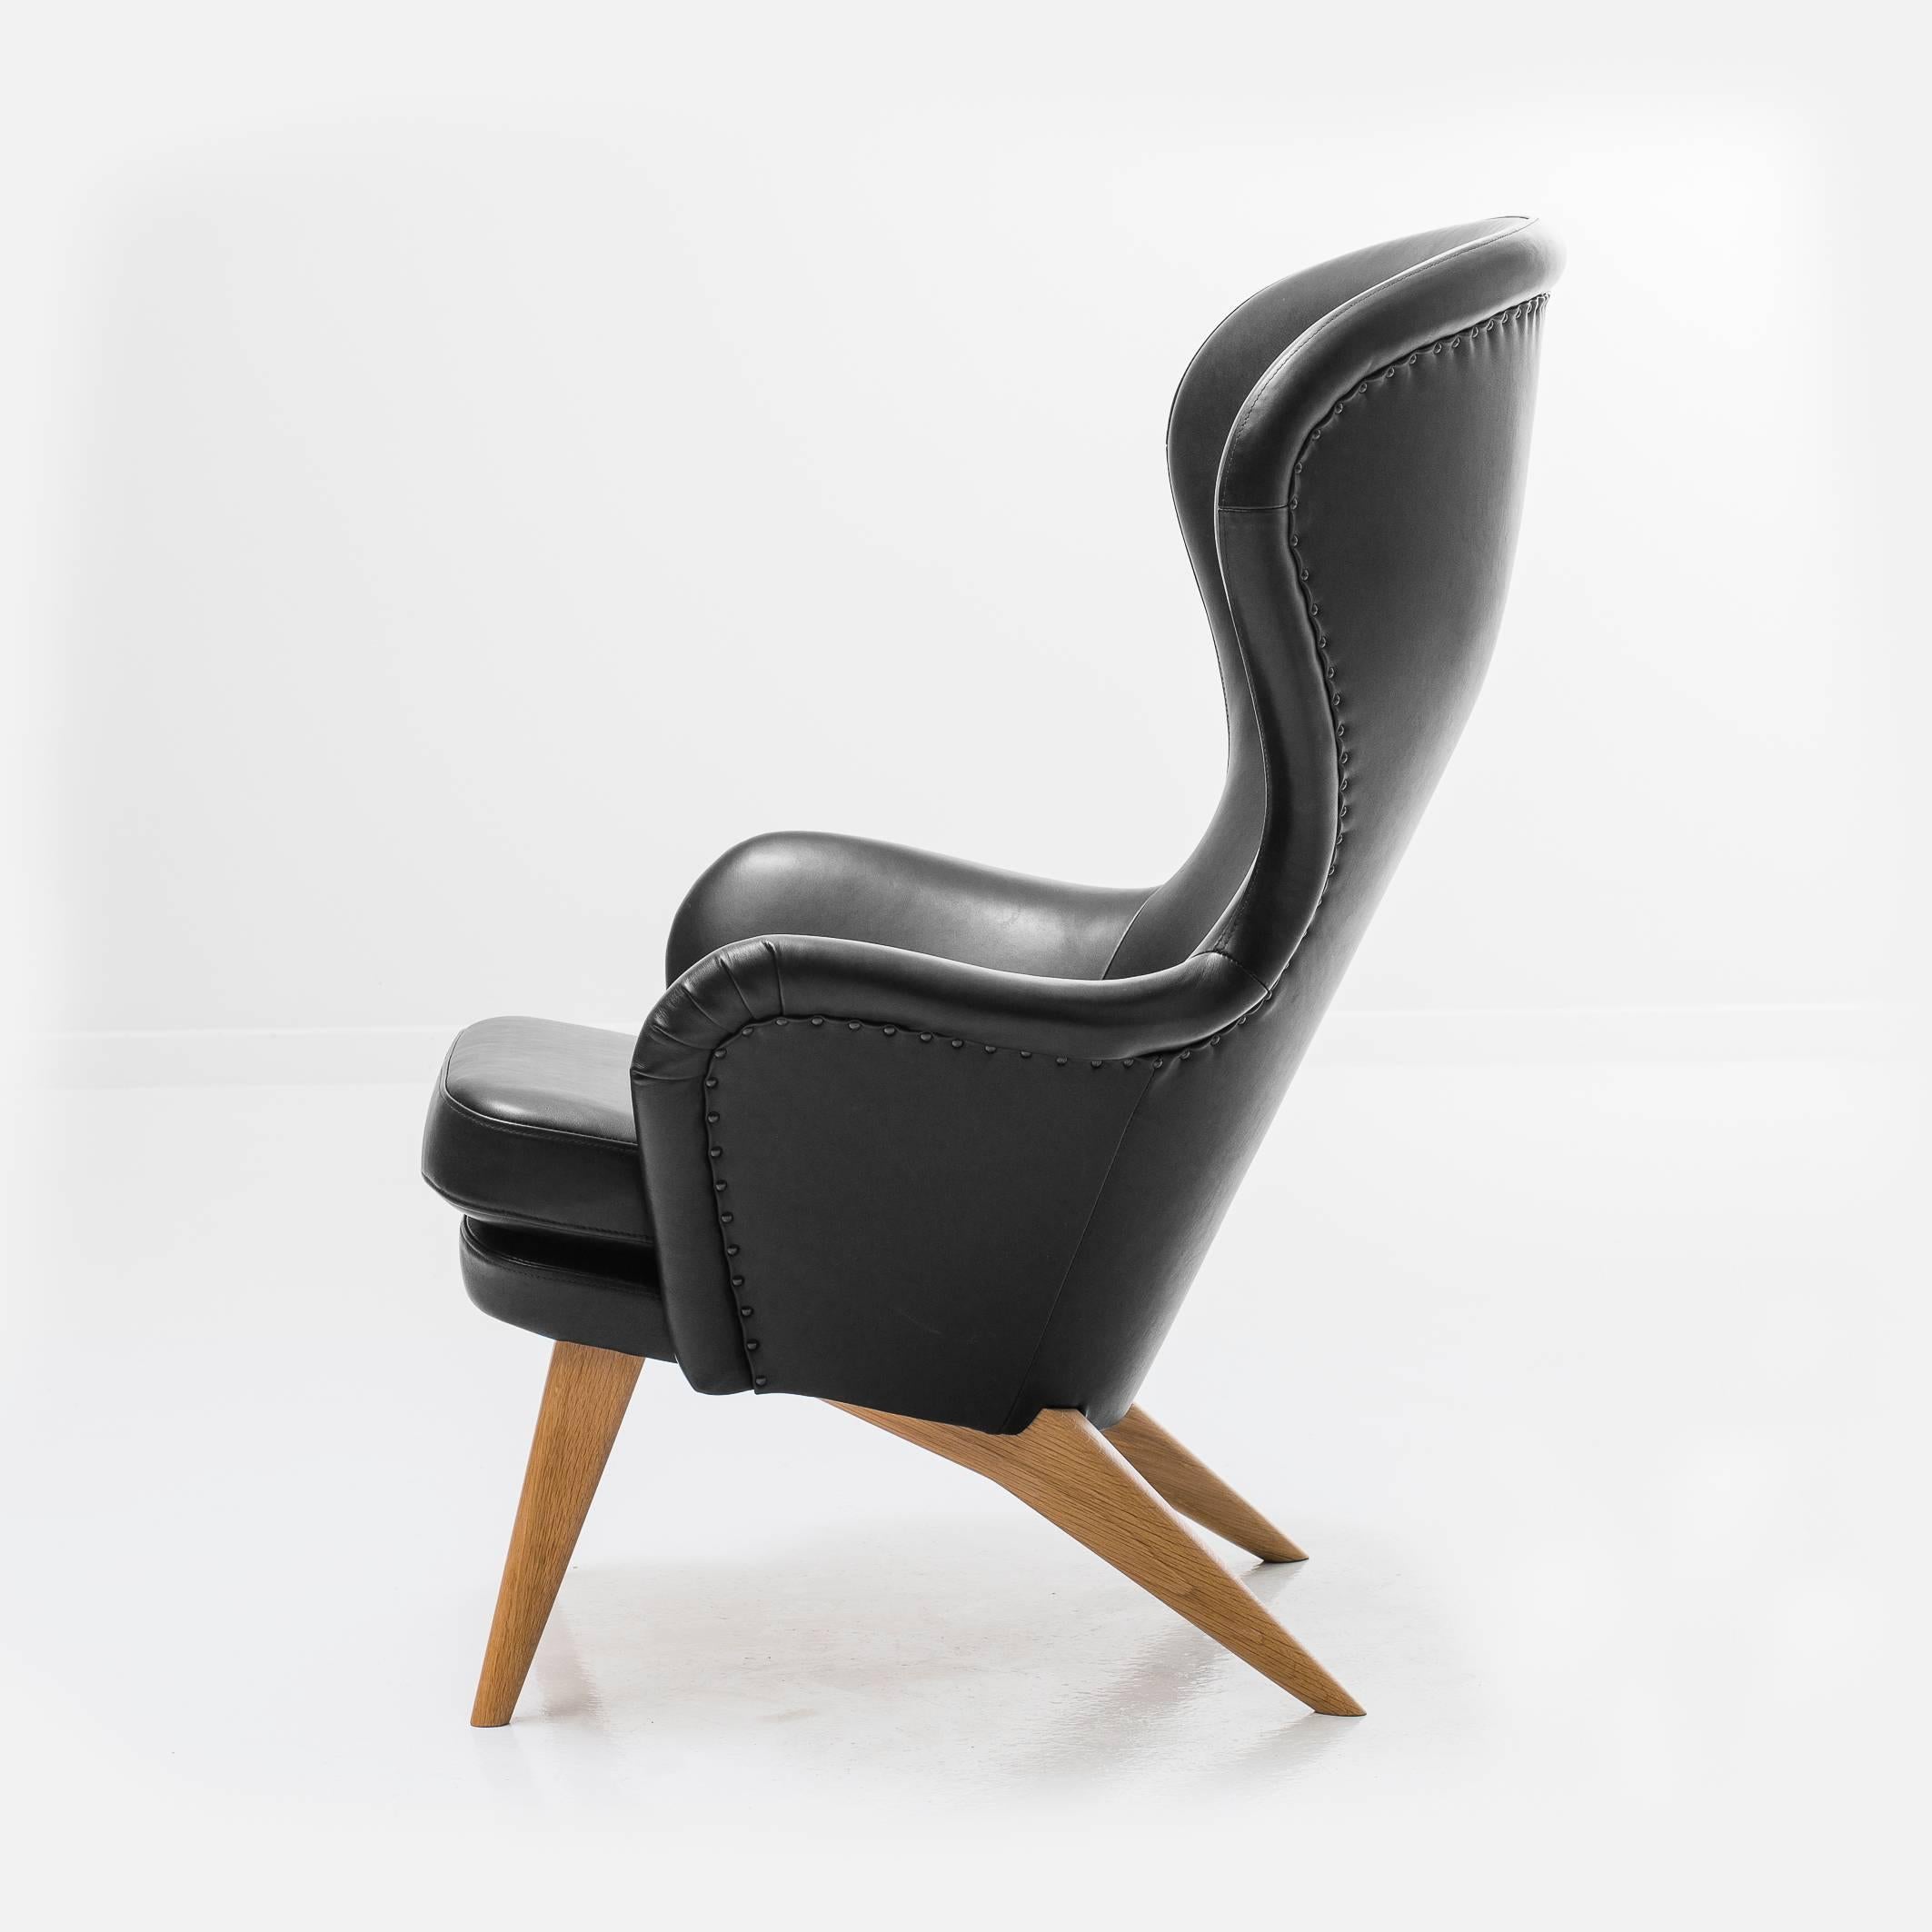 Siesta is a lounge chair designed by Carl Gustav Hiort af Ornäs in 1952. This sumptuous chair is one of the designer’s best-known products and its manufacturing technique is one of the most challenging ones in the collection. Siesta’s elegant